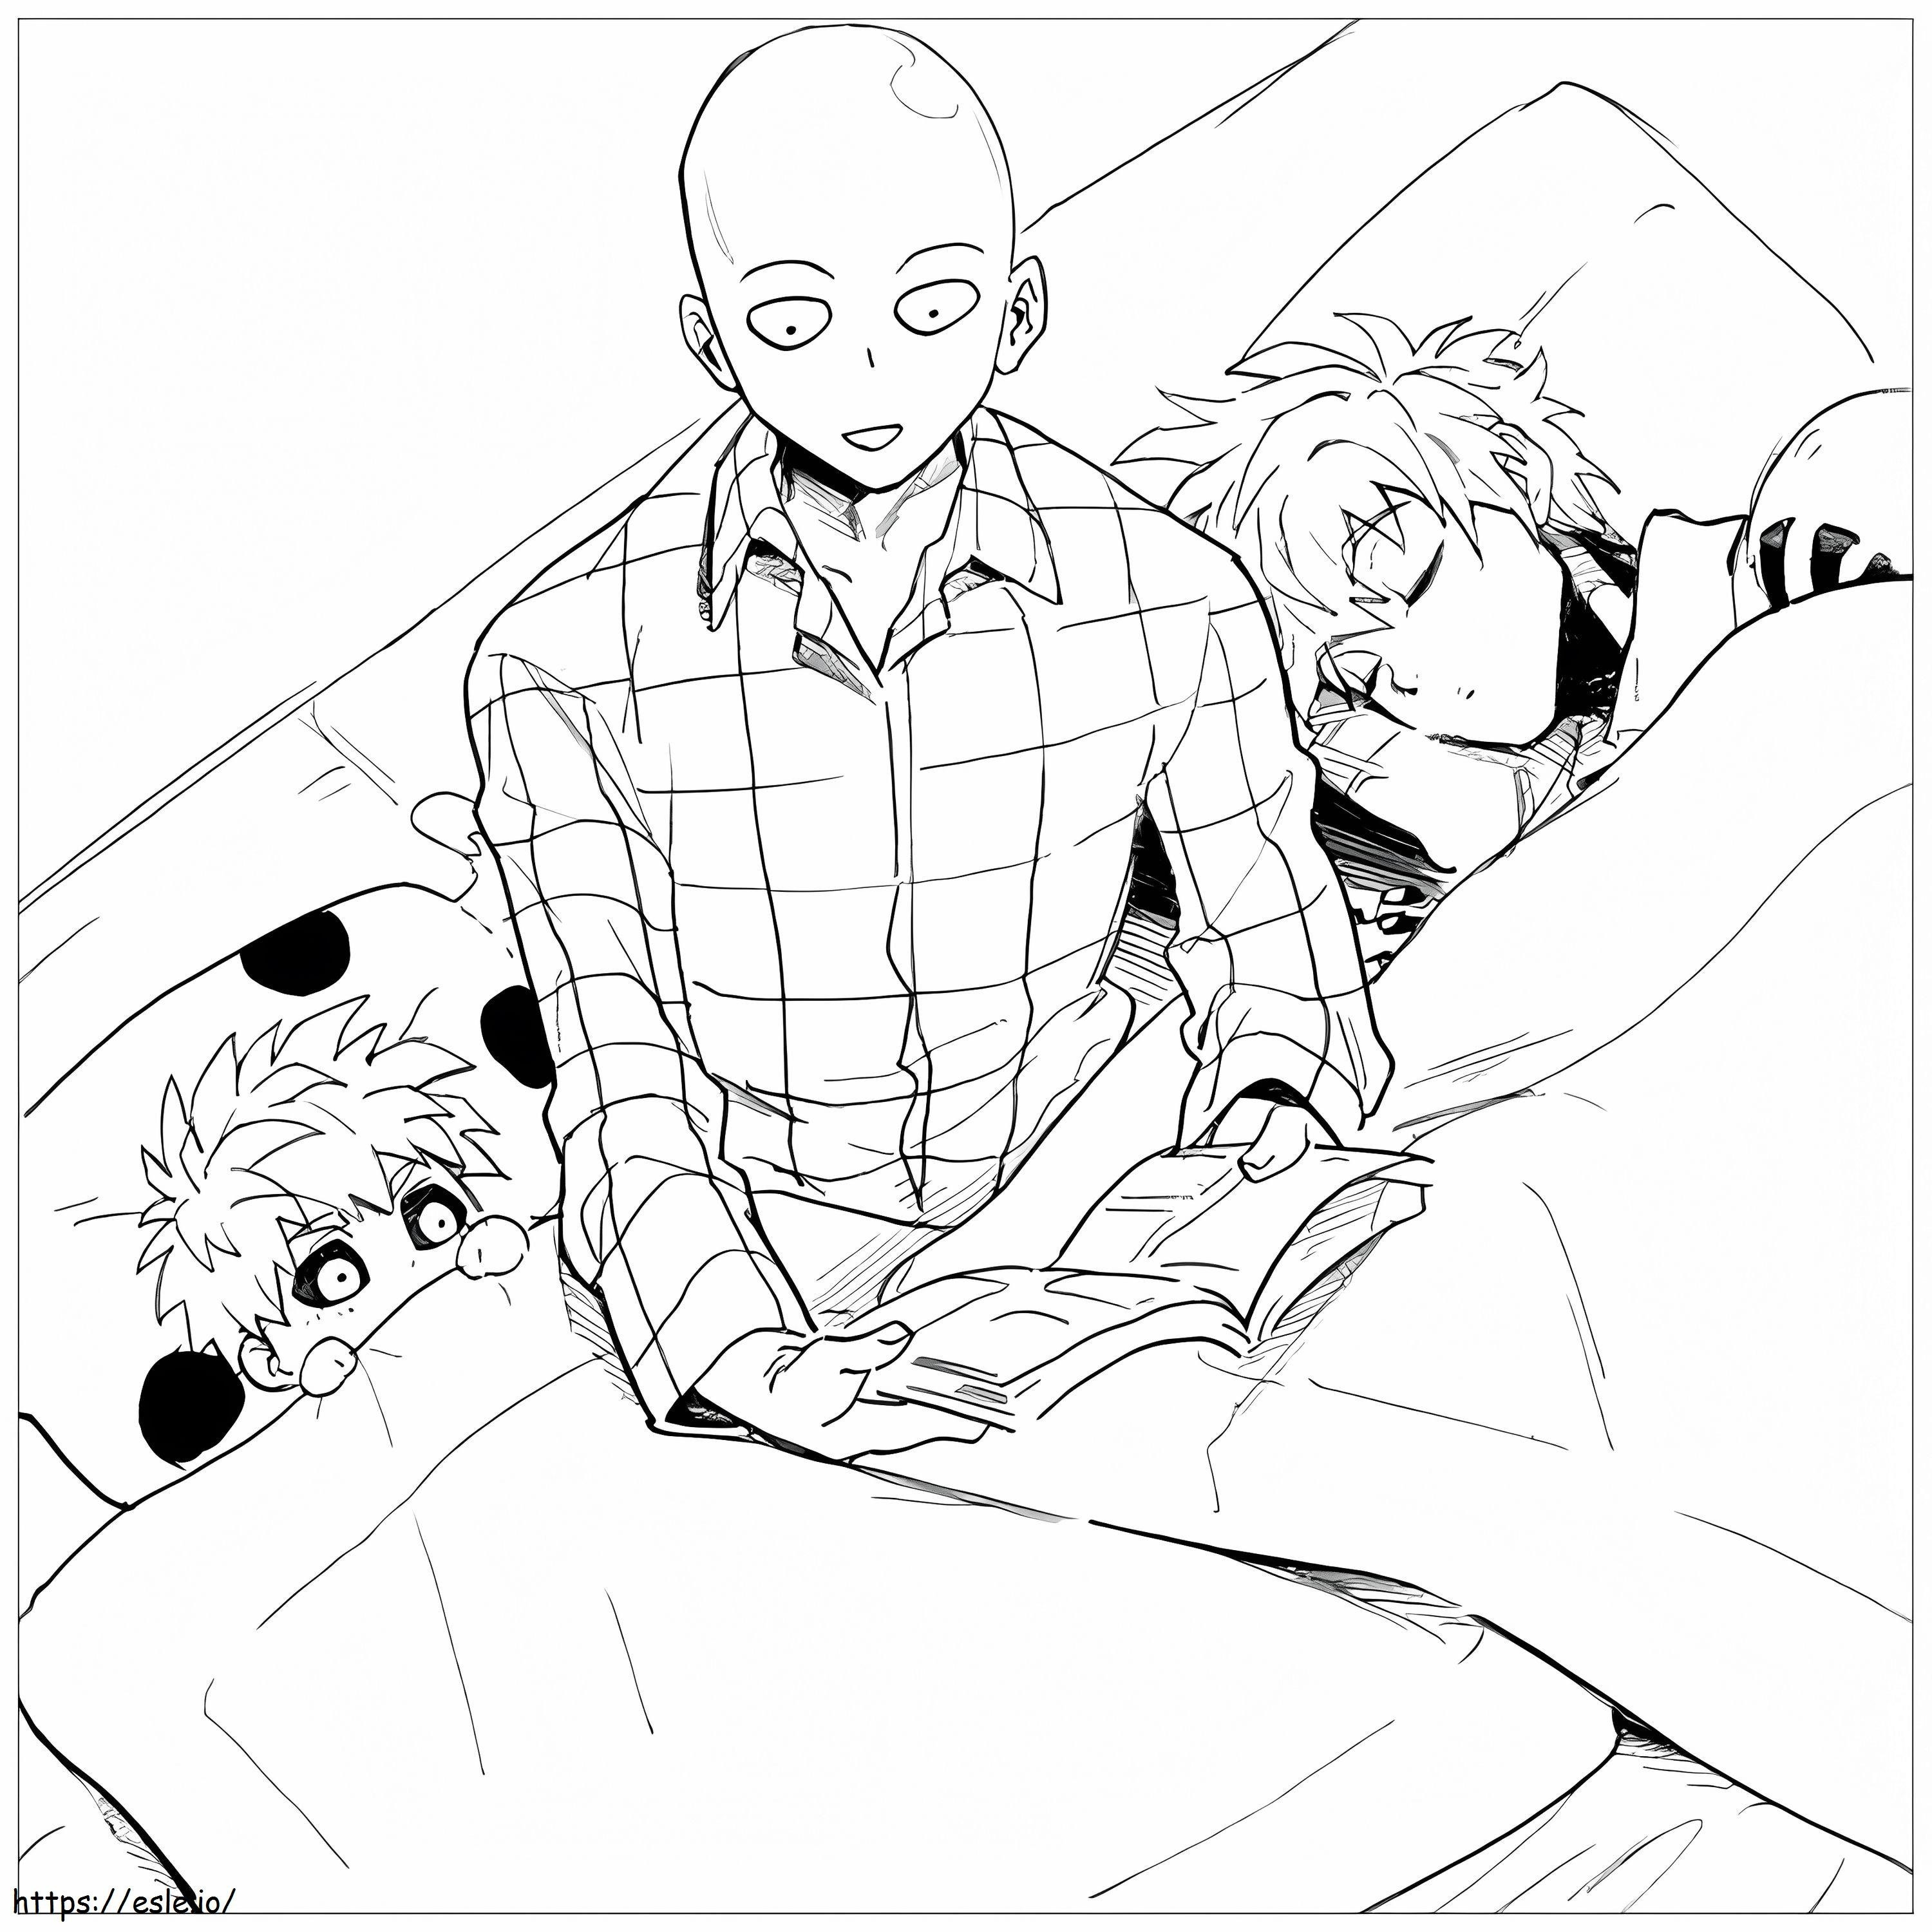 Saitama And Genos In Bed coloring page